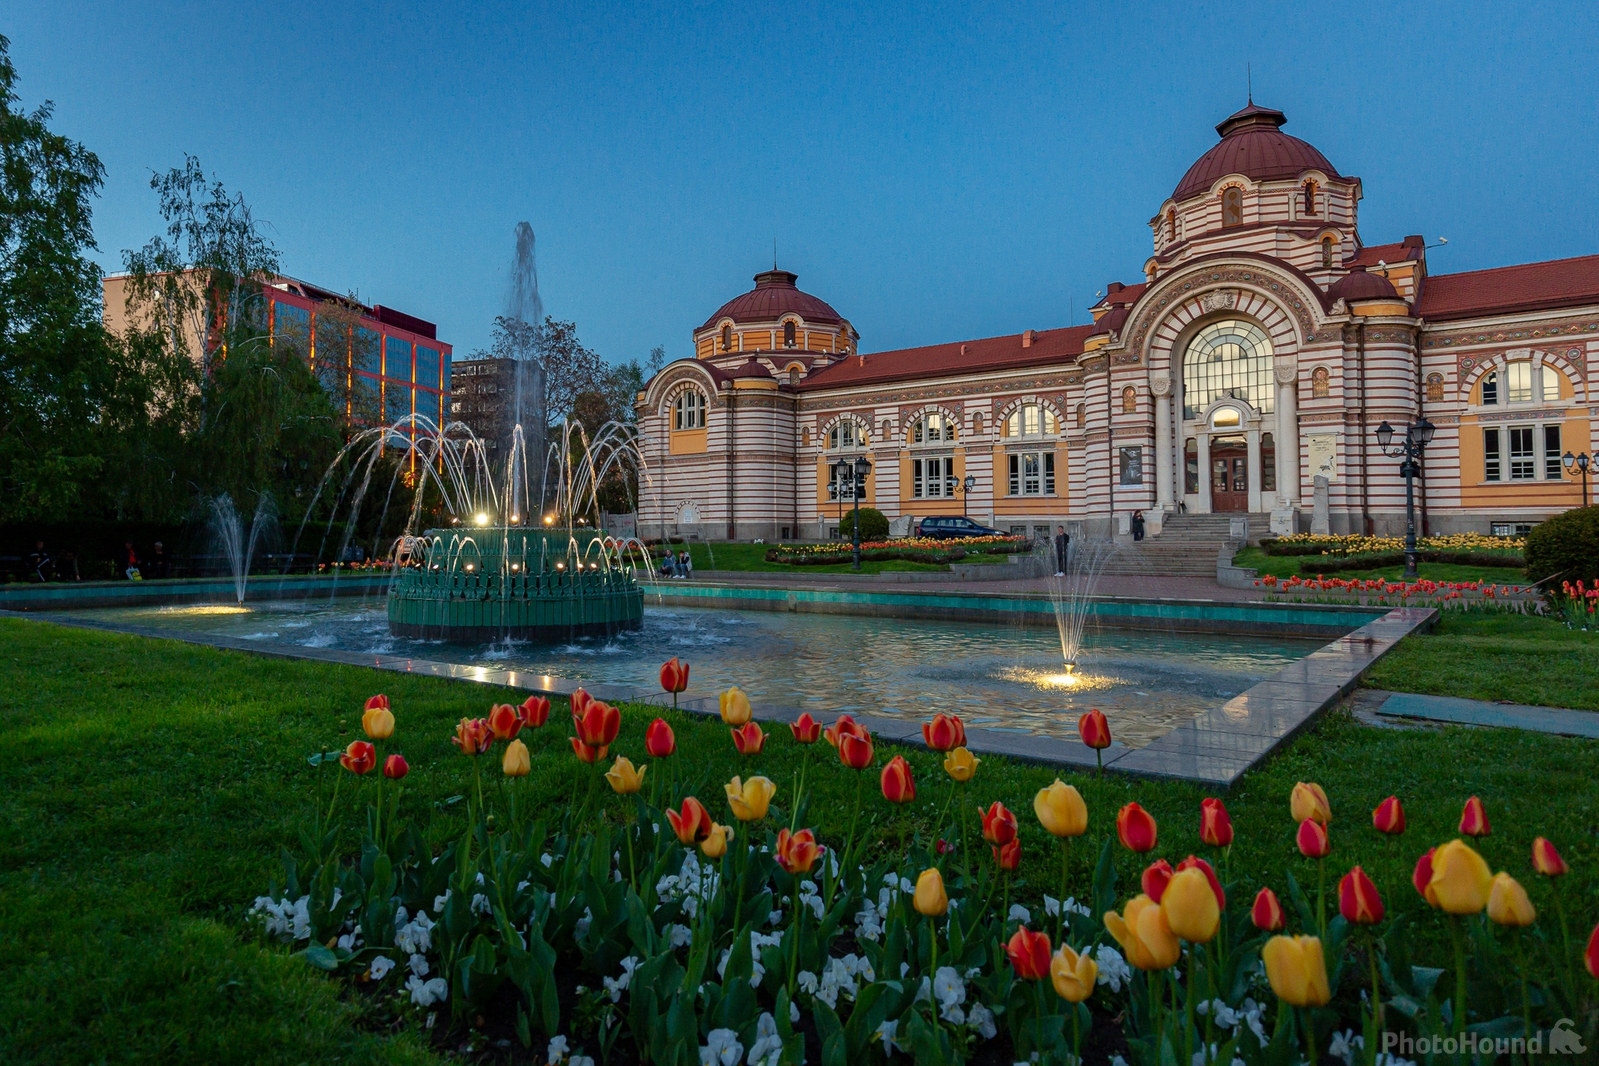 Image of Sofia History Museum by Dancho Hristov